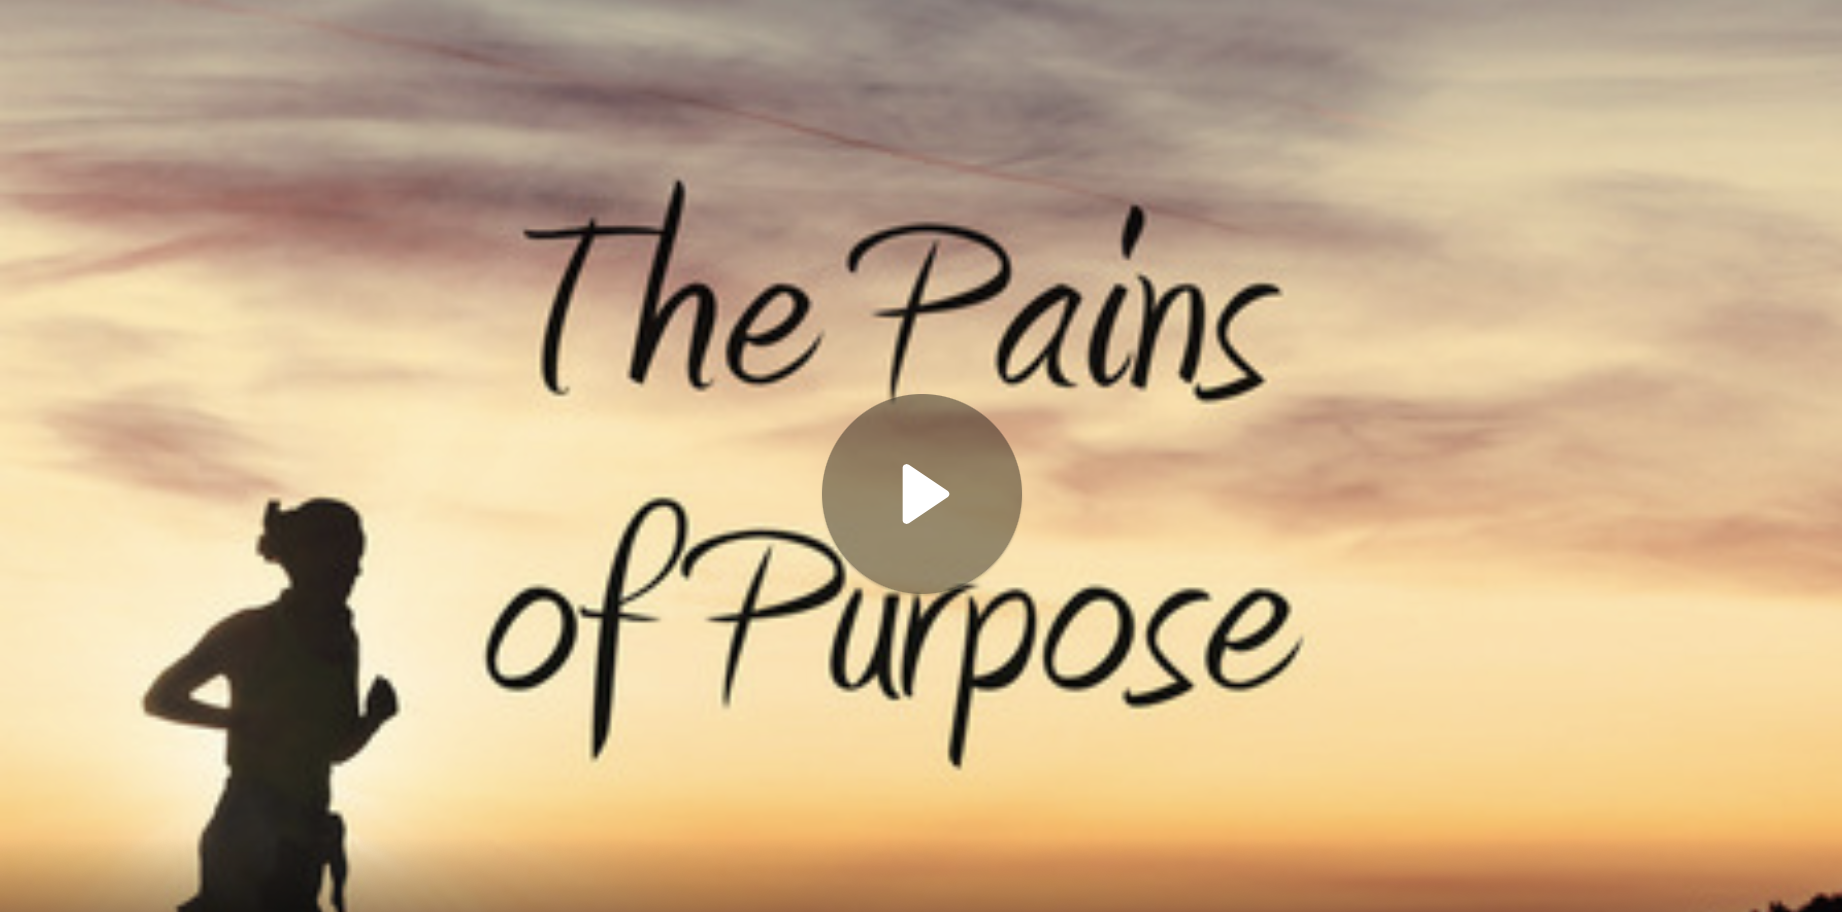 The Pains of Purpose